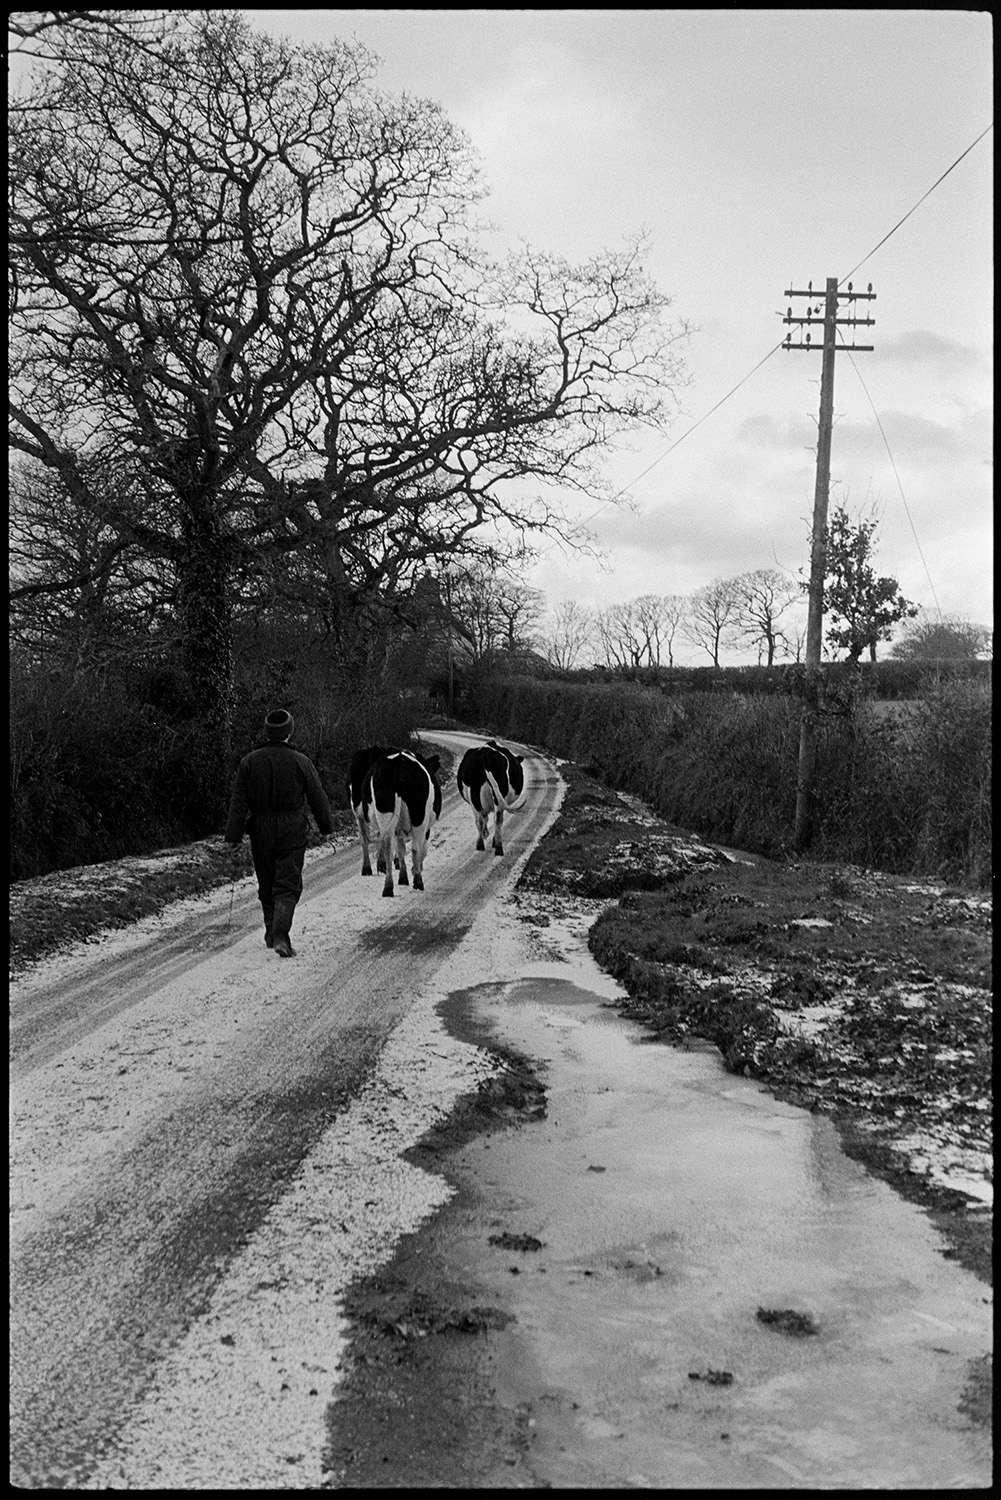 Milking herd of cows going through village. 
[Fred Folland herding three dairy cows along a road with trees at Upcott, Dolton to go to be milked. The road has a light dusting on snow.]